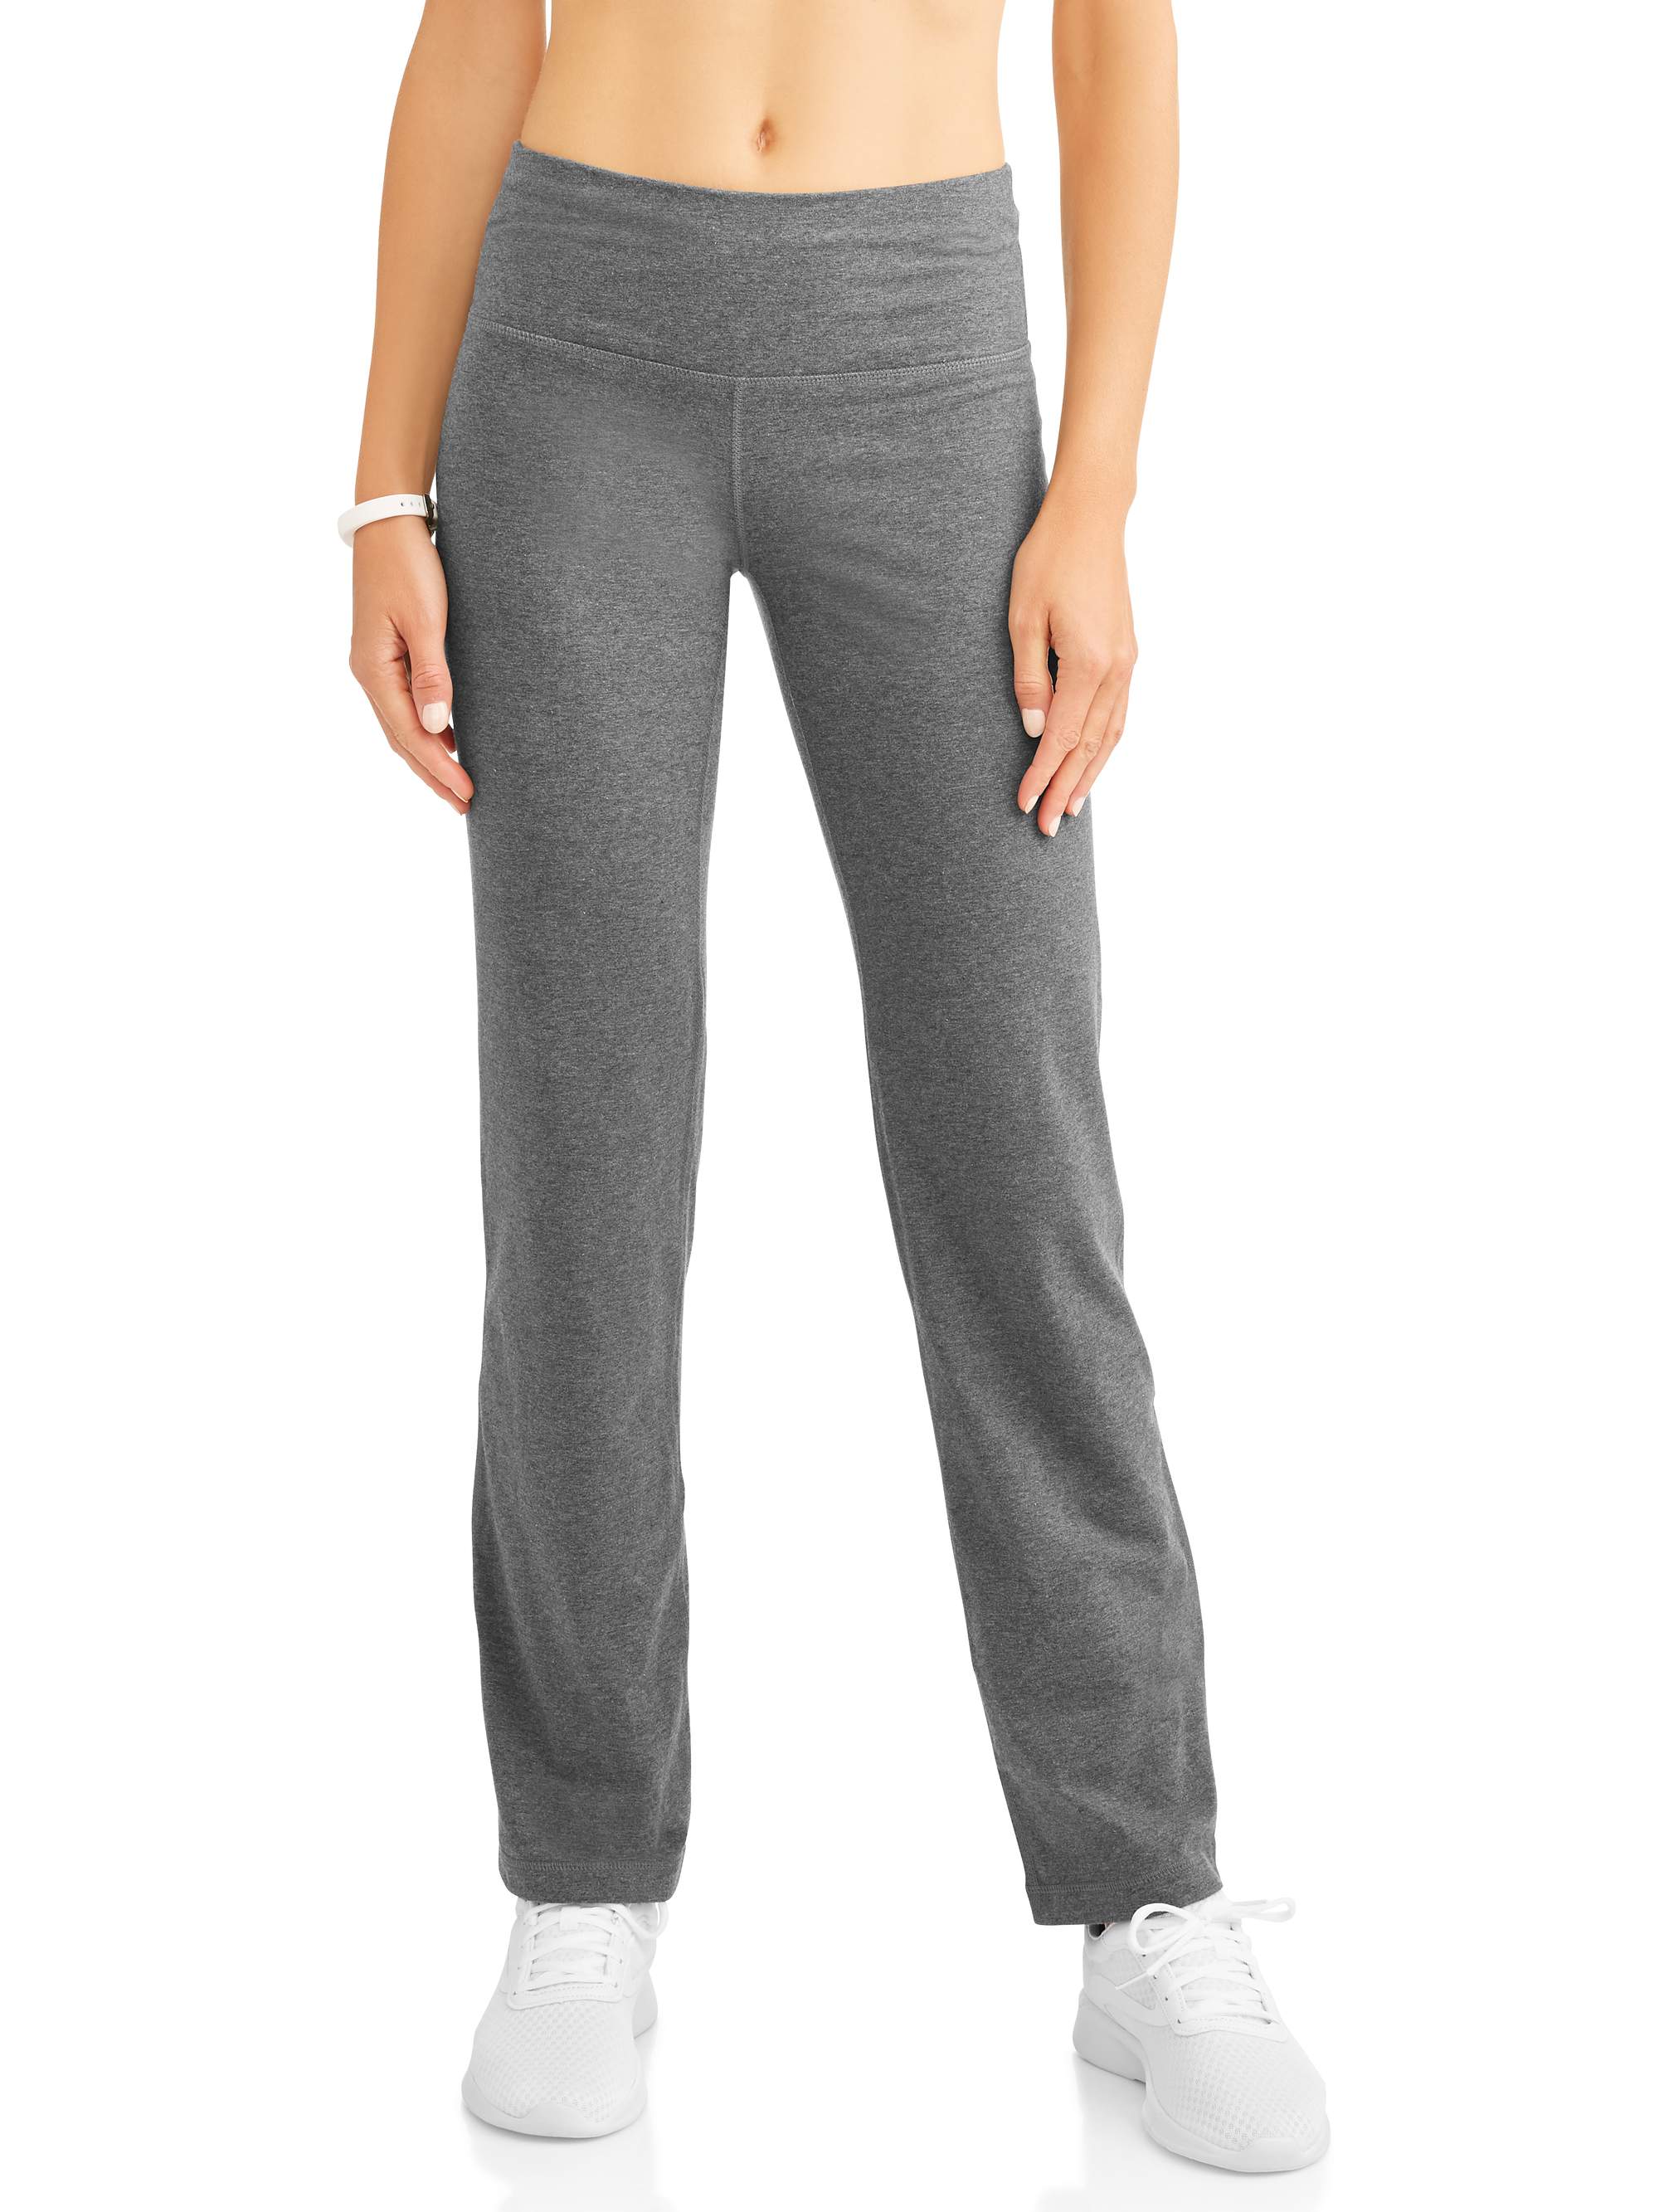 Athletic Works Women's Athleisure Performance Straight Leg Pant Available in Regular and Petite - image 1 of 4